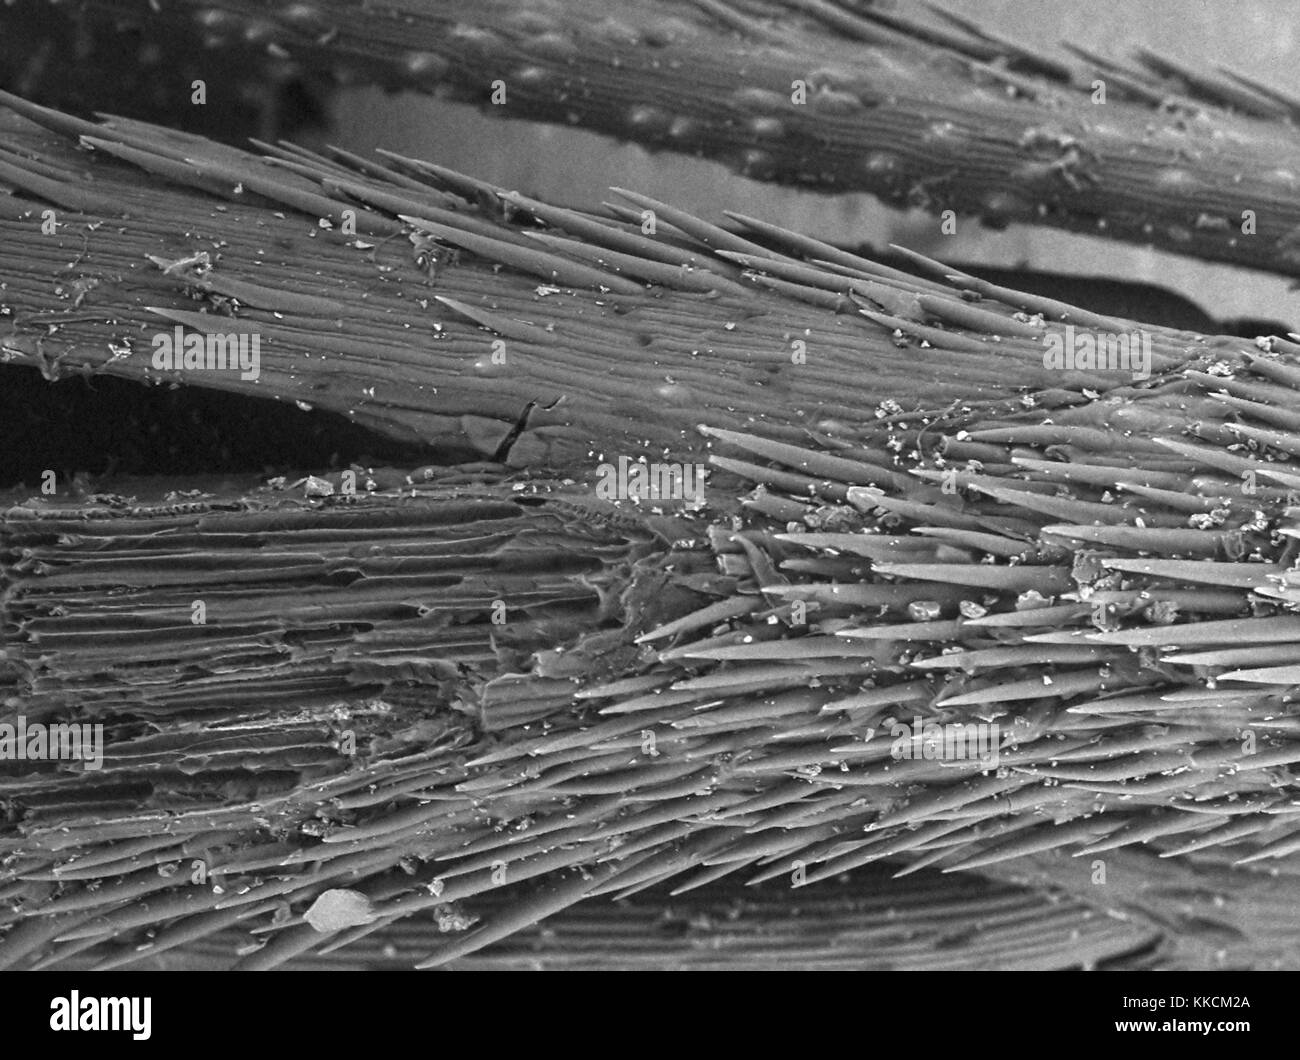 Scanning electron microscope (SEM) micrograph showing foxtail grass (Hordeum murinum), including micro-barbs which are responsible for the grass' ratcheting effect, at a magnification of 300x, 2016. Stock Photo